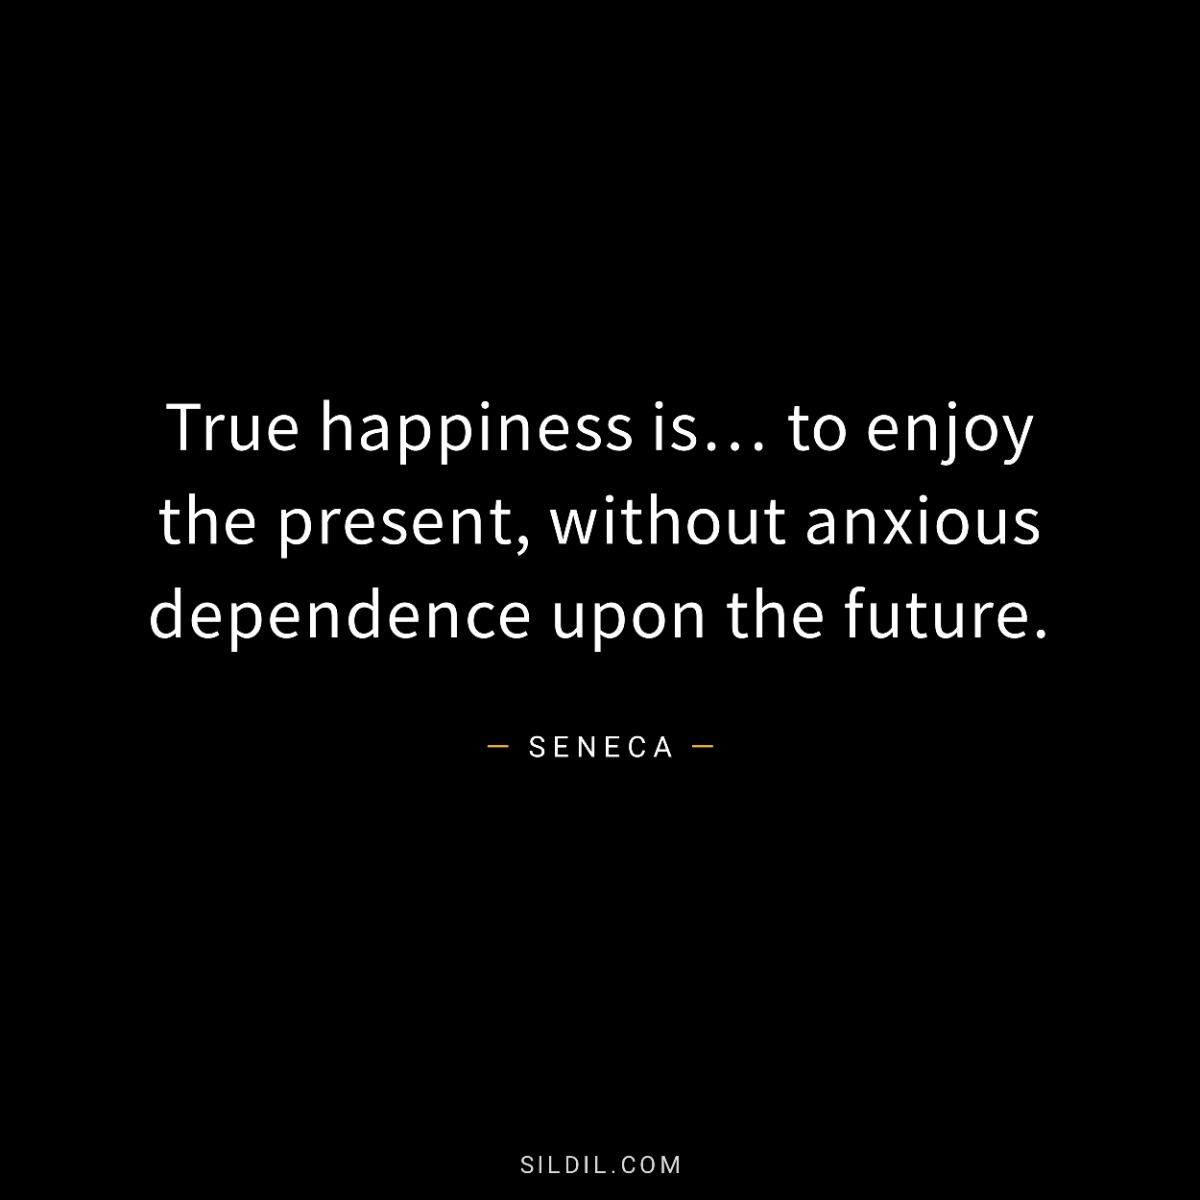 True happiness is… to enjoy the present, without anxious dependence upon the future.